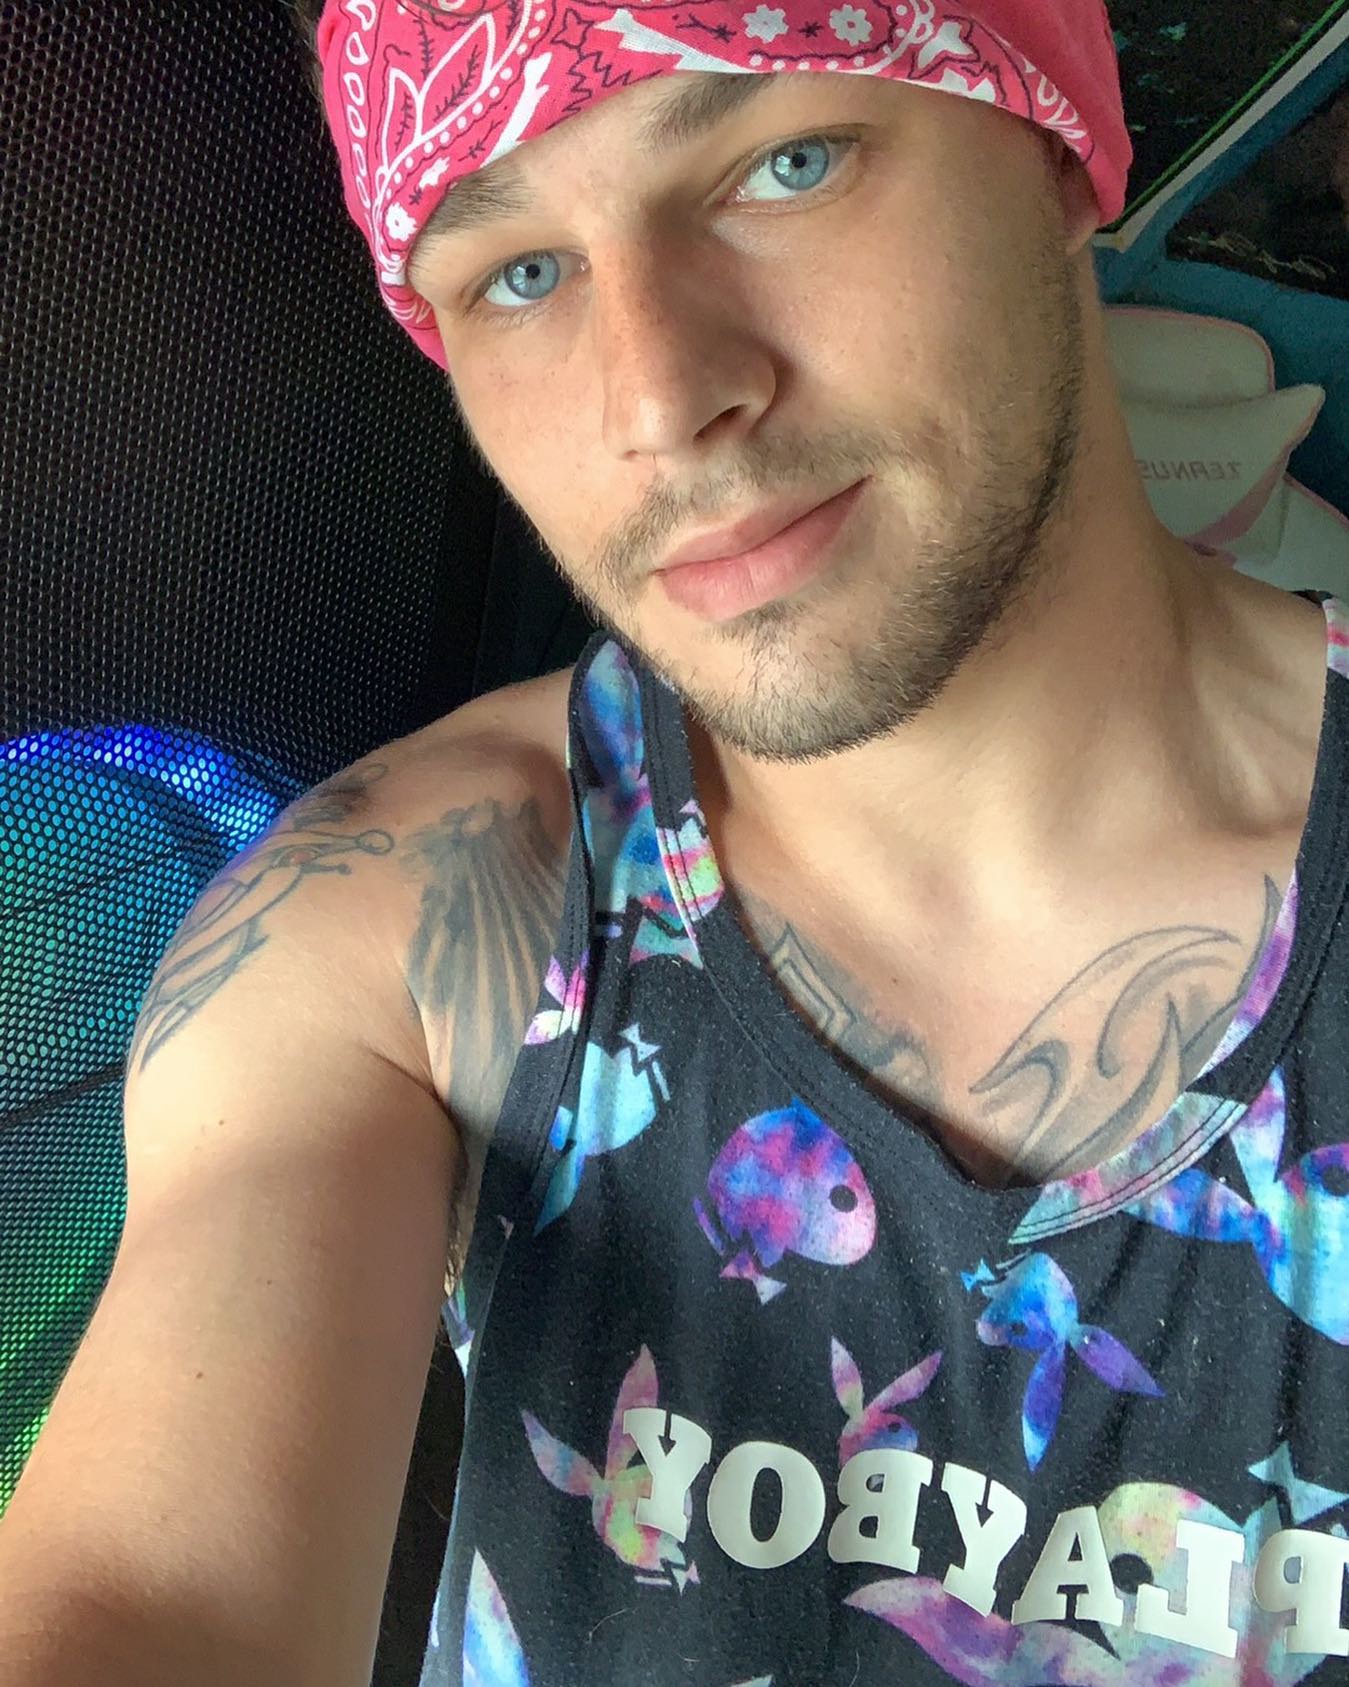 Let’s get it boys and girls ! Have a great day ! Enjoy that sunshine ☀️ daddy’s back and better then ever !
.
.
.
 #daddy #tatted #11 #blueeyes #single